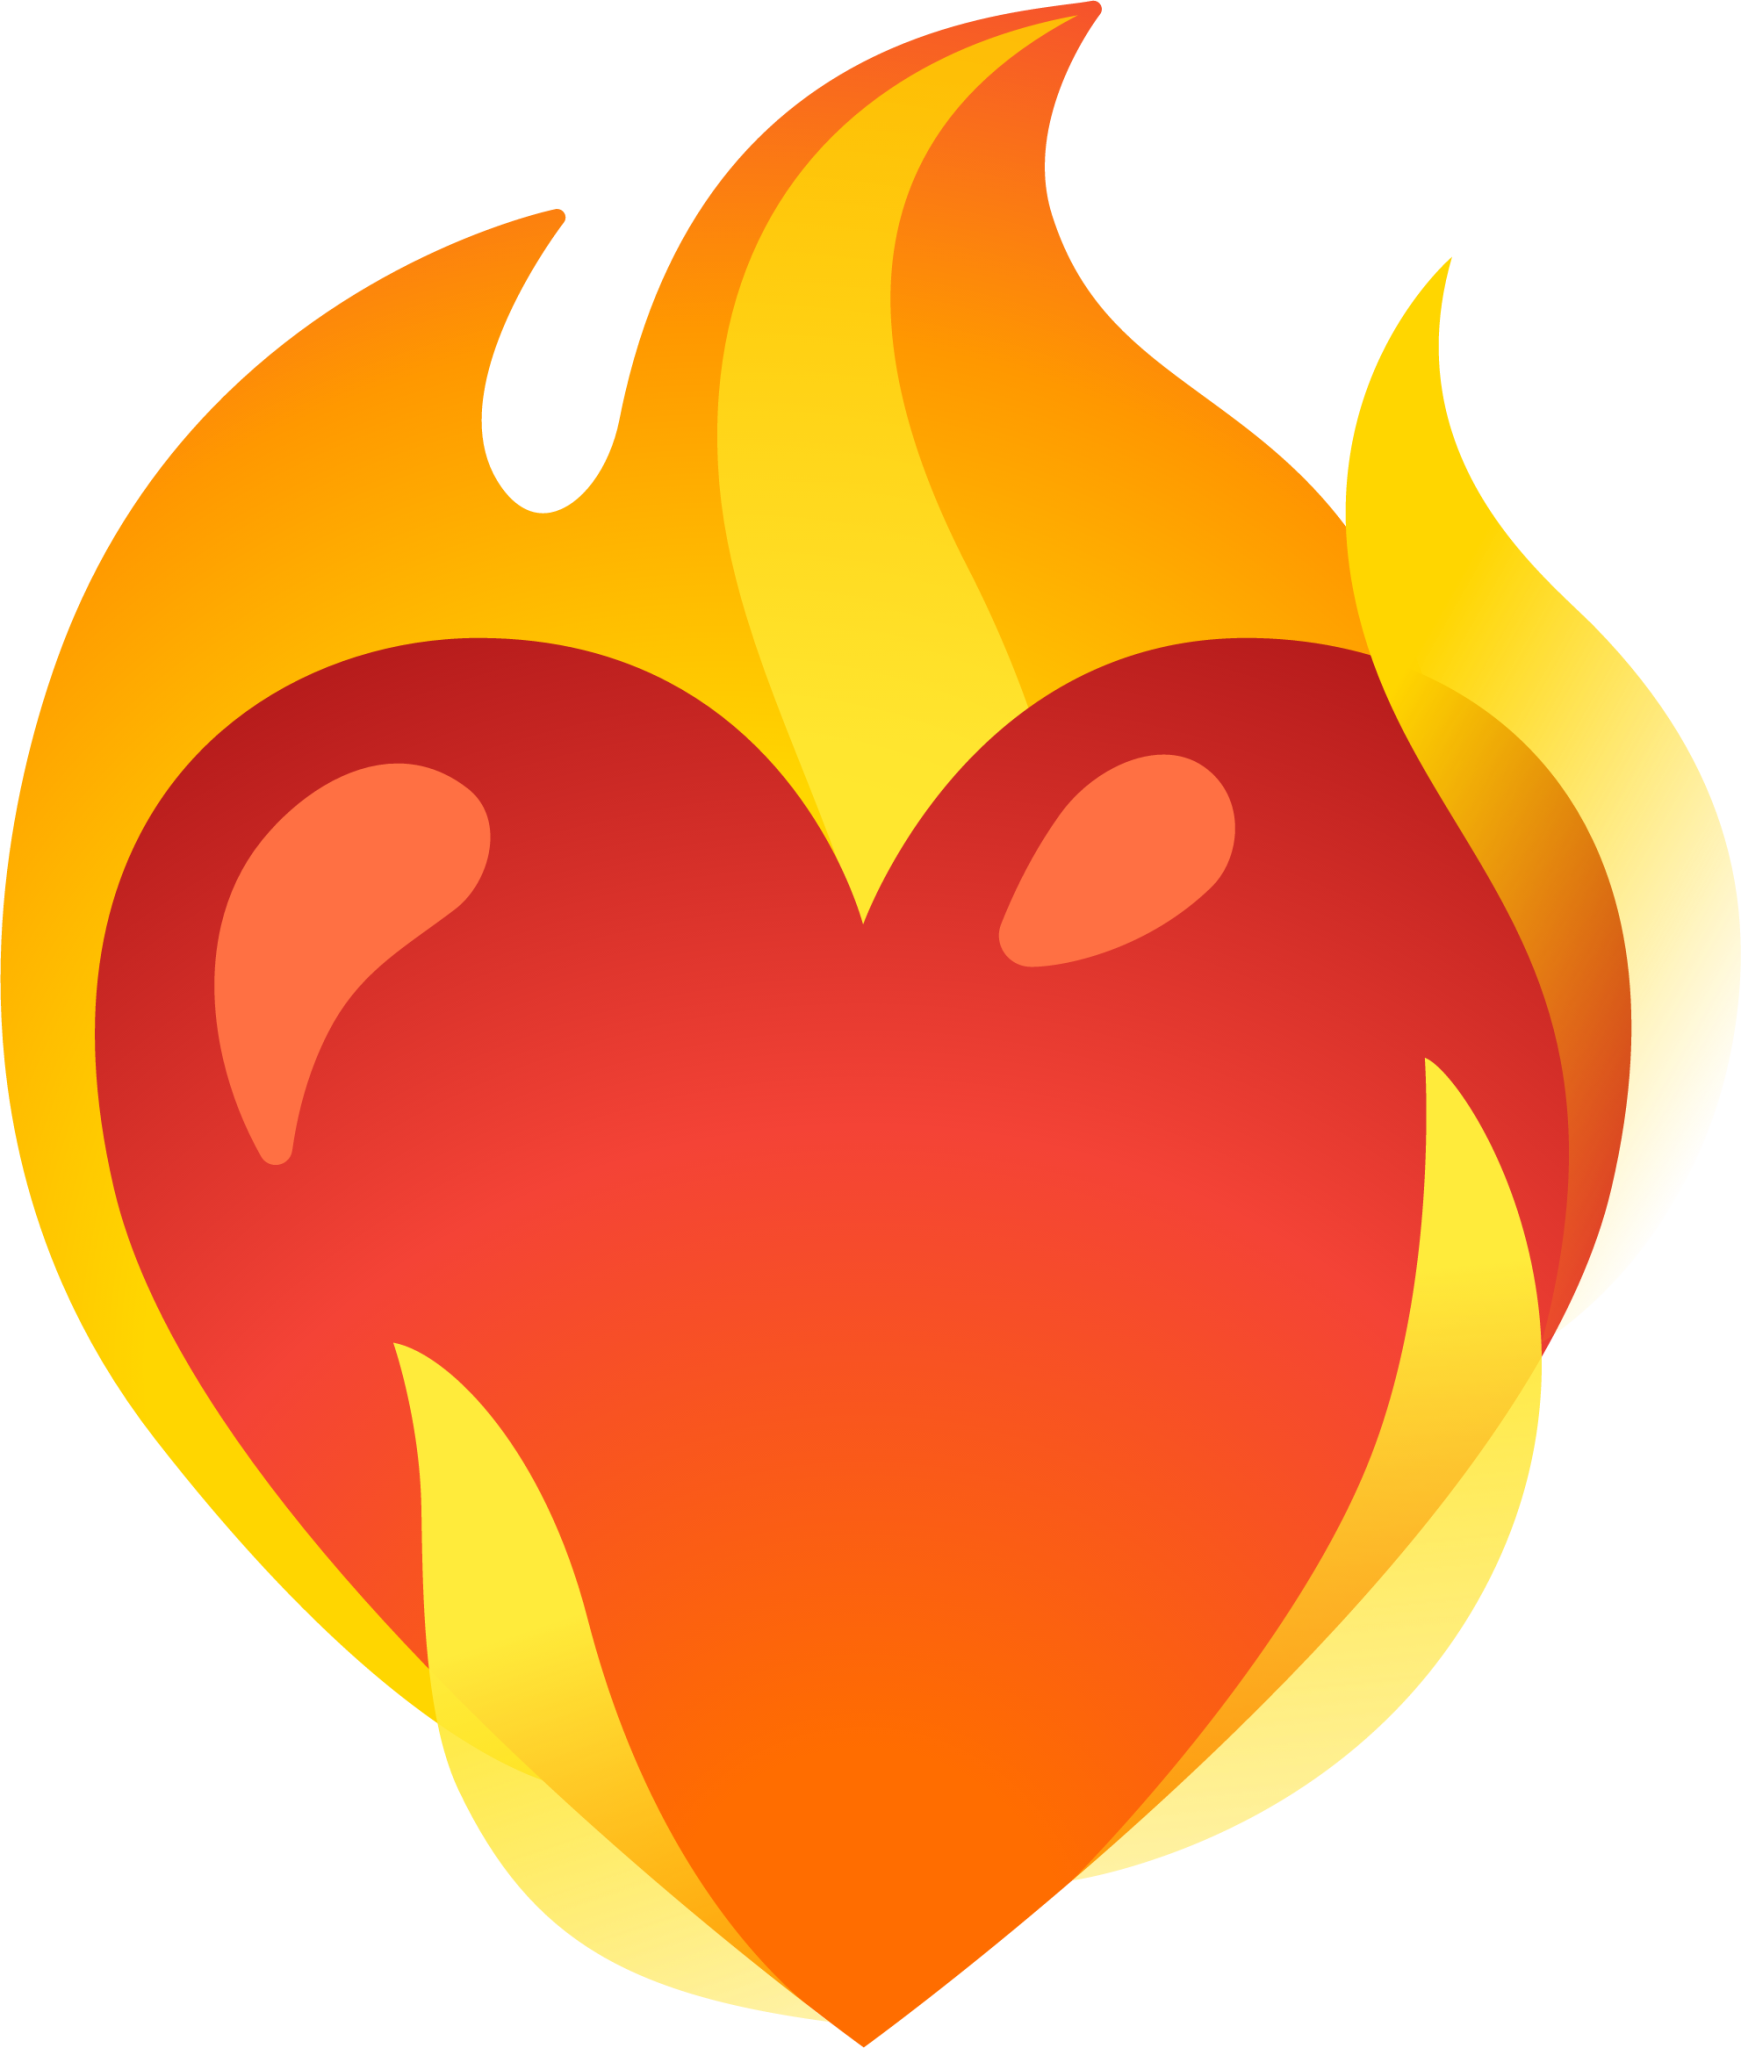 Heart On Fire Emoji Download For Free Iconduck